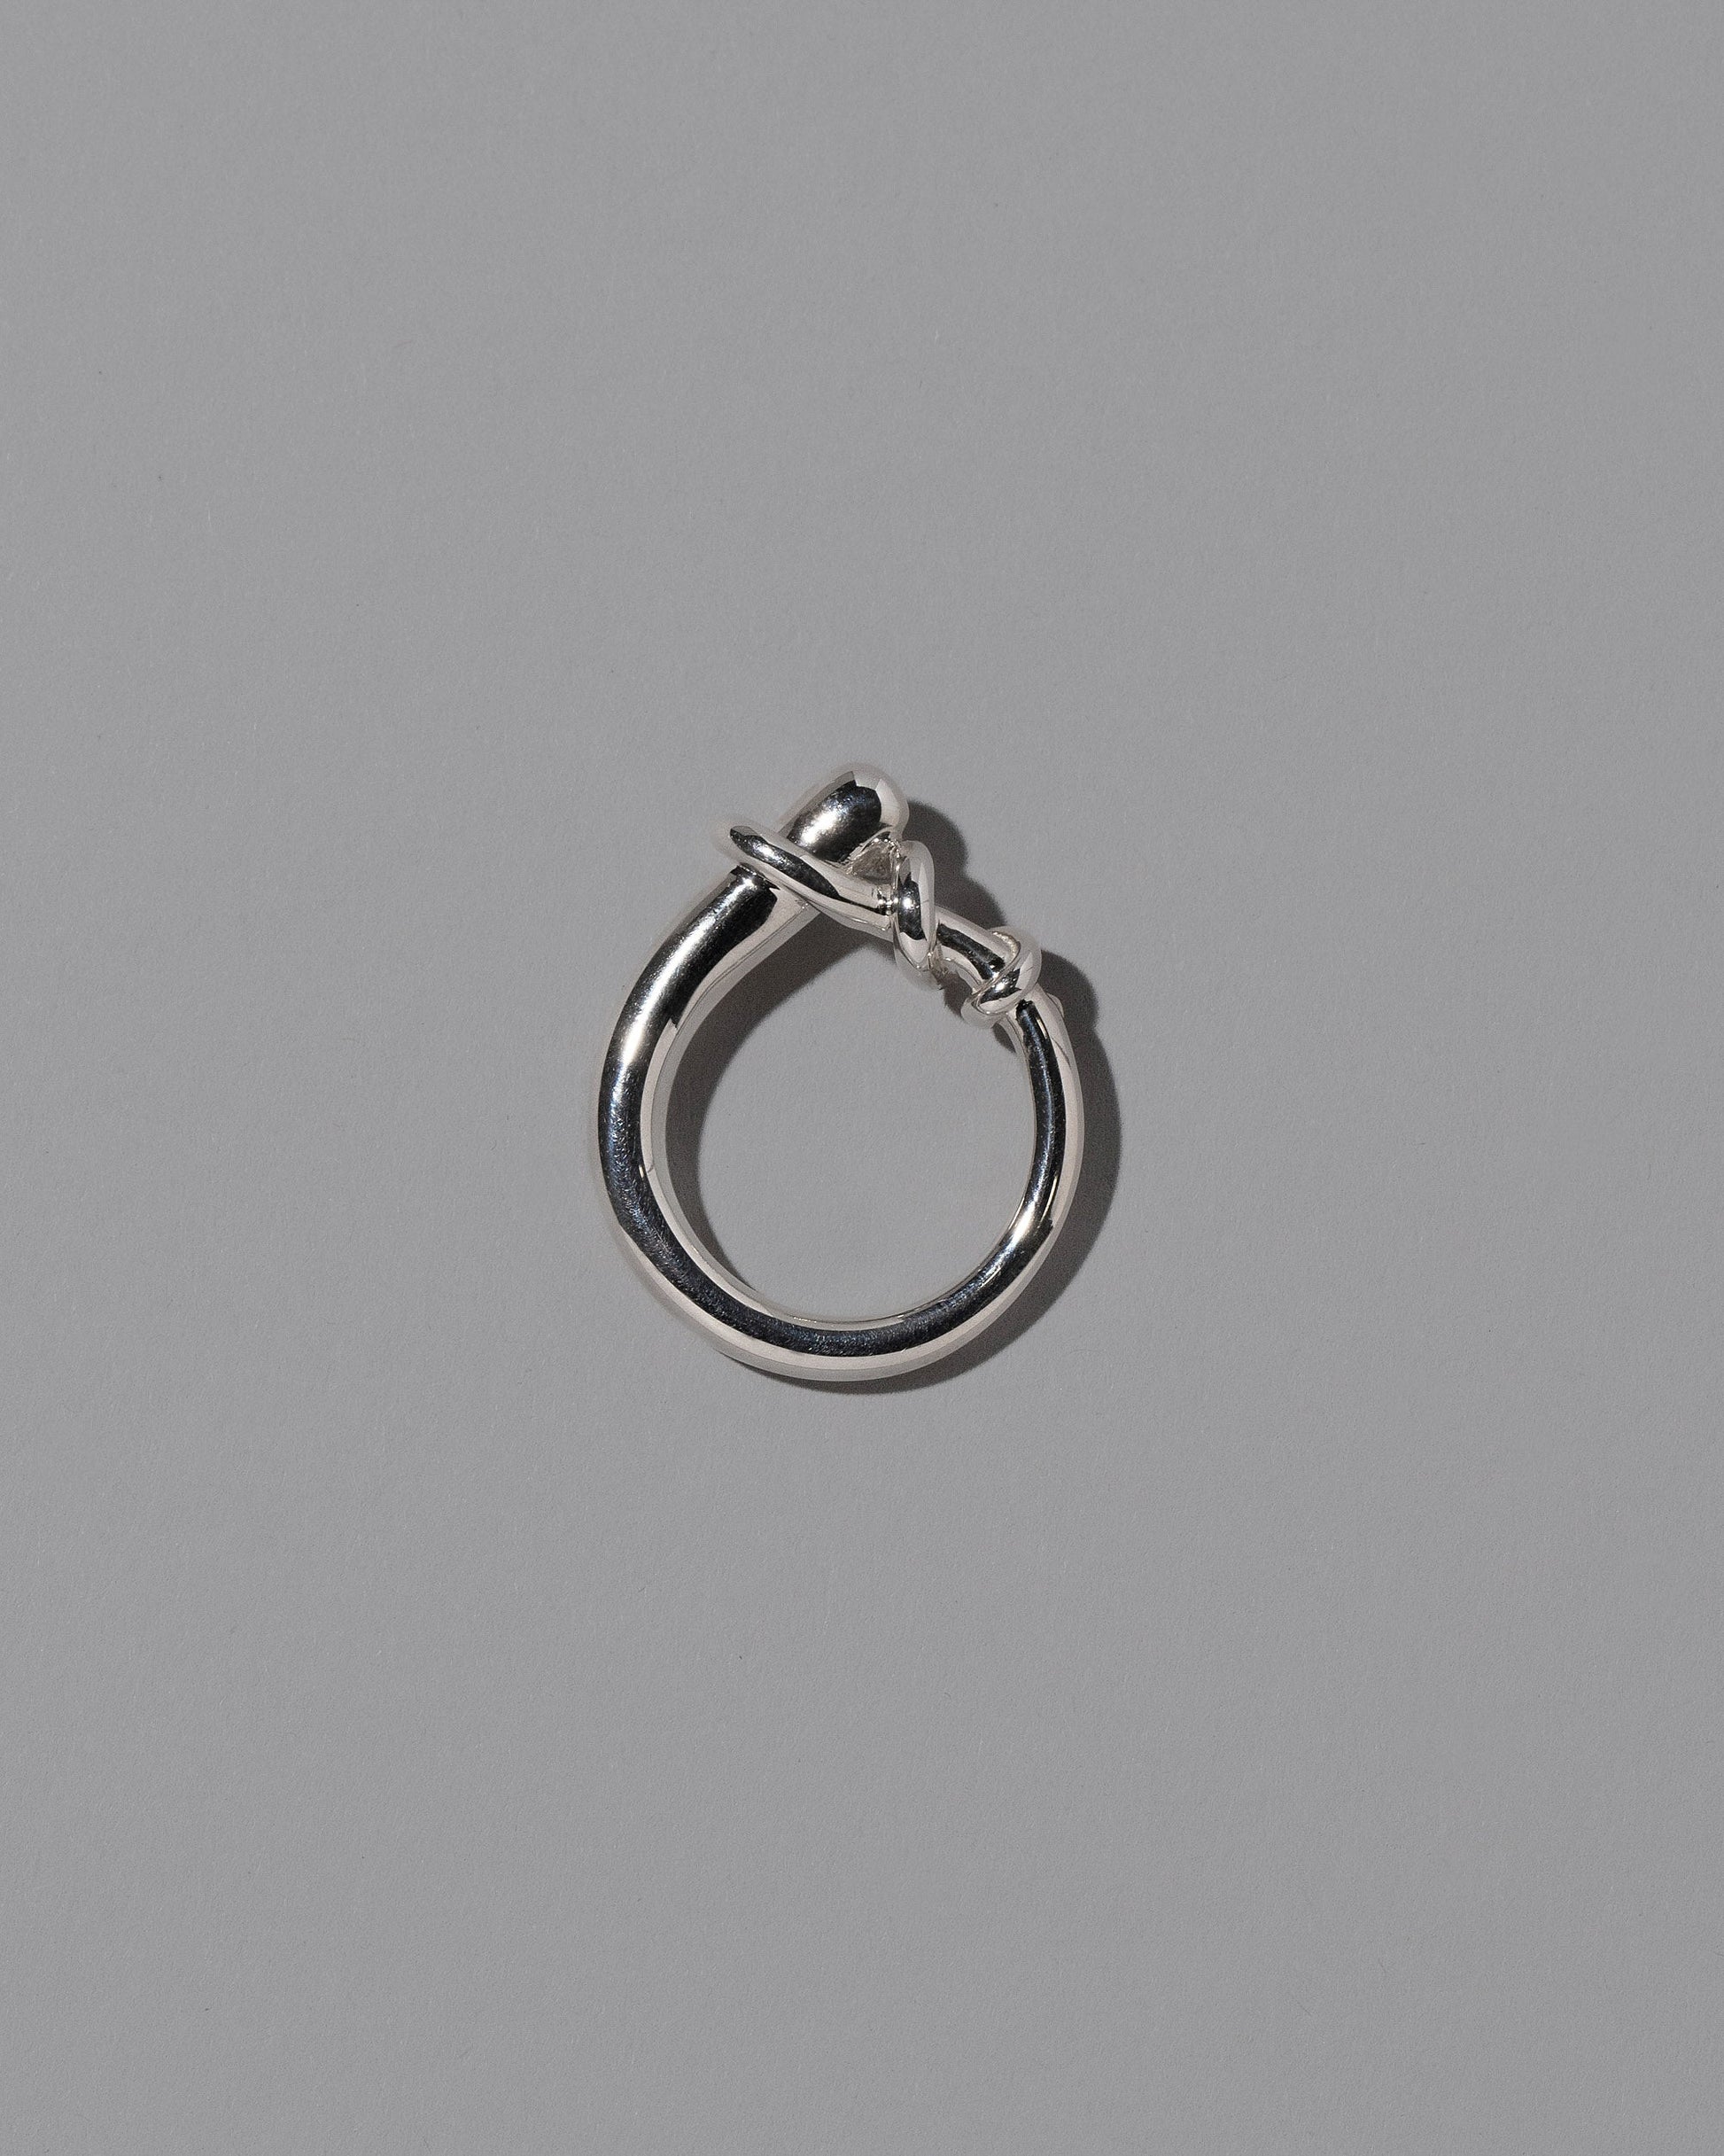 View from the side of the CRZM Sterling Silver Terrane Ring on light color background.